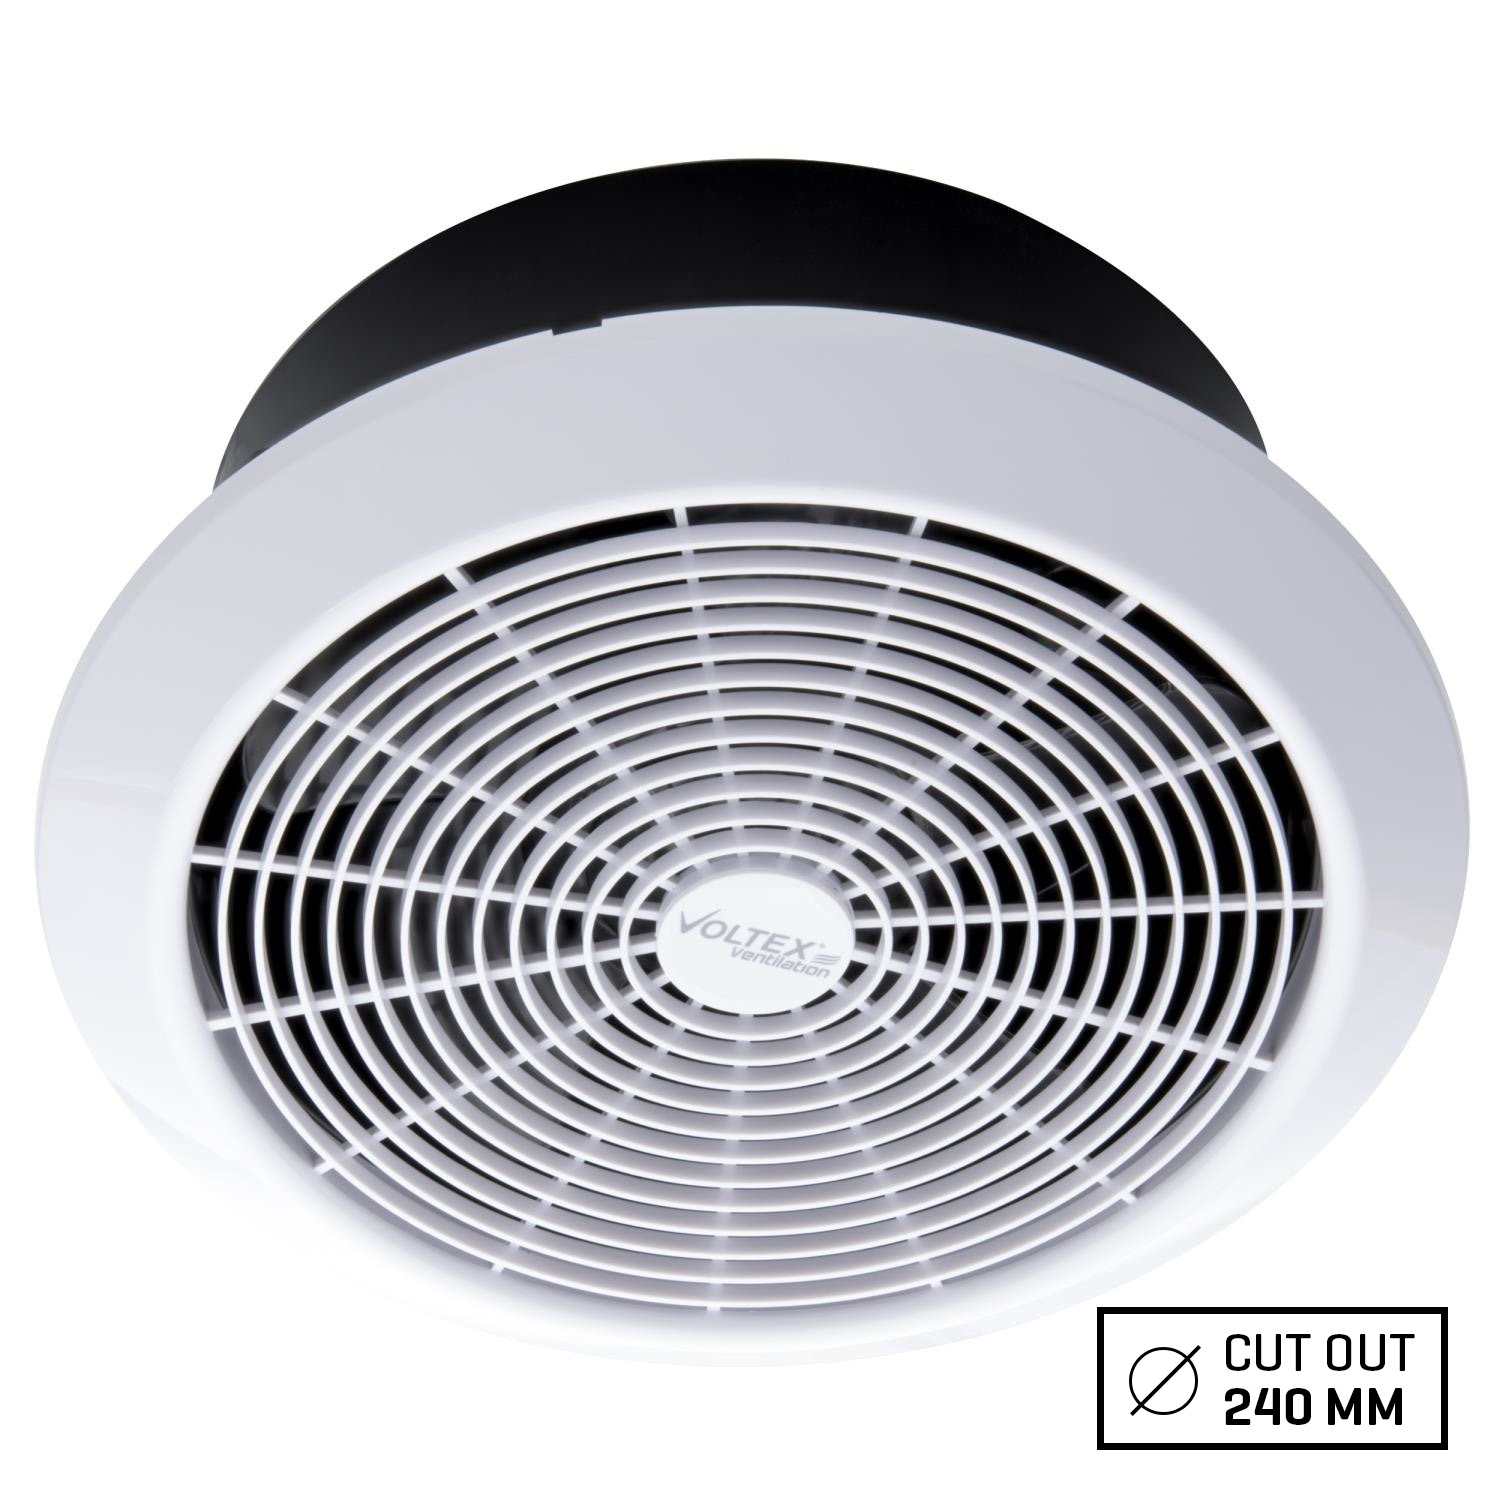 Voltex 200mm Flush Mounted Ceiling Exhaust Fan With Draft within measurements 1500 X 1500